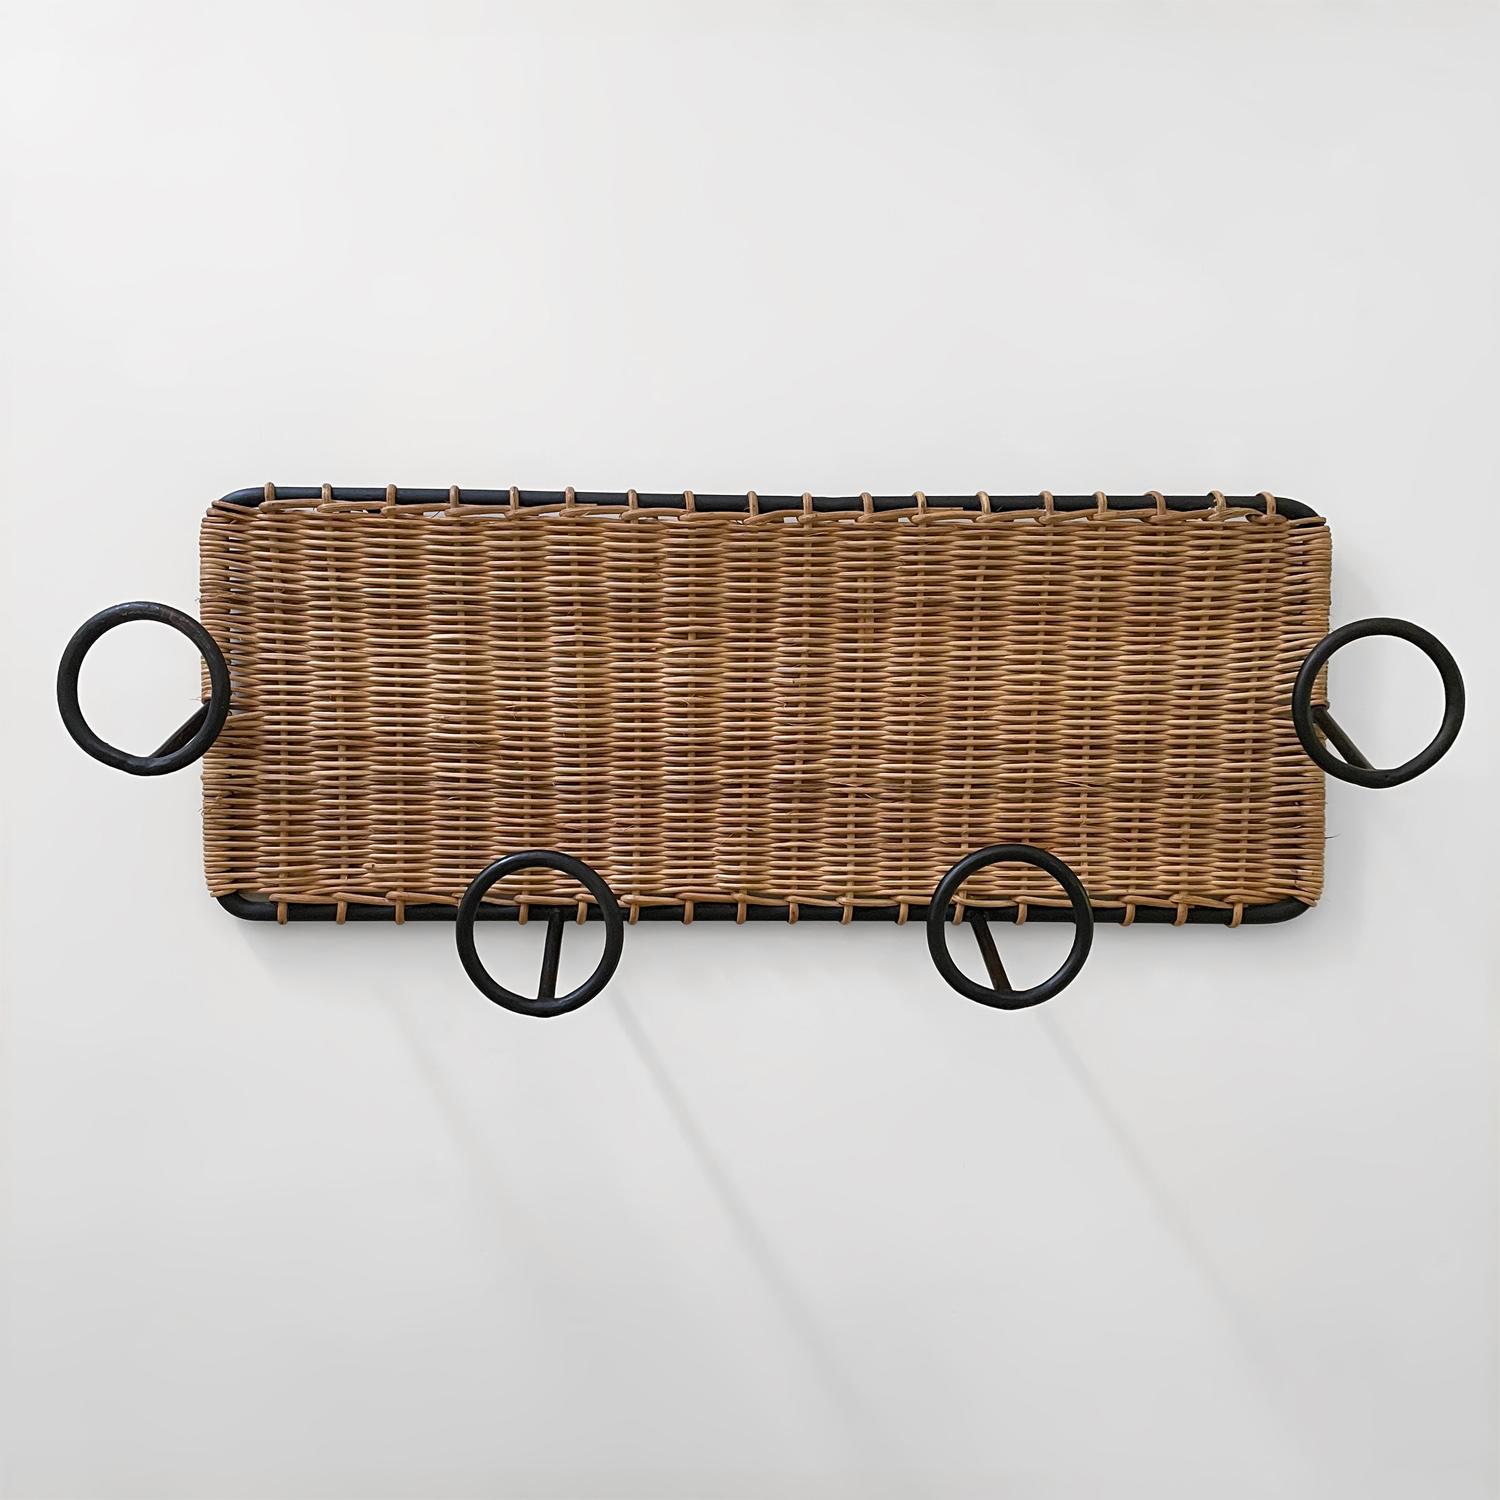 French Wicker and Iron Coat Rack in the style of Jacques Adnet 
France, circa 1950s
Wicker intricately woven around solid iron frame with four iron loop hooks 
Natural color variations
Beautiful form and function
Patina from age and use
We have a